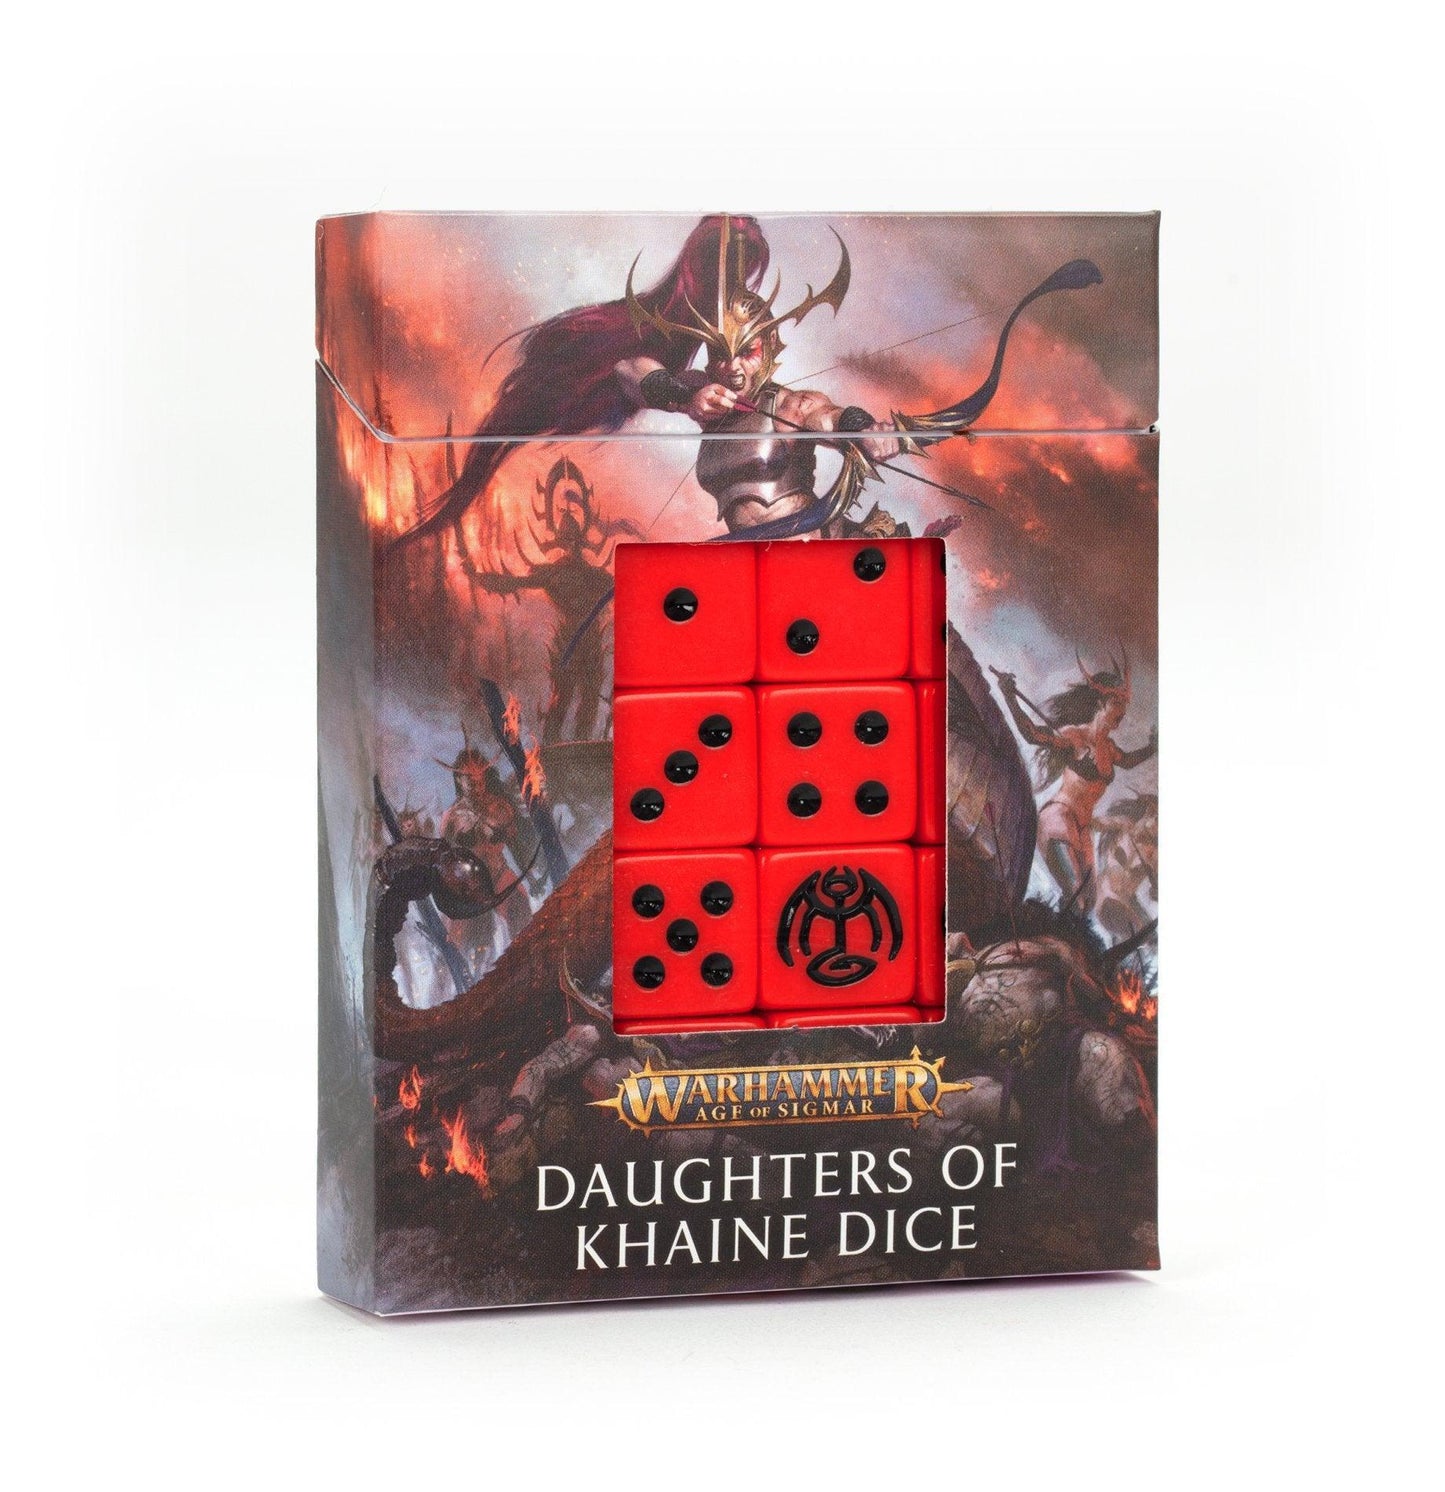 DAUGHTERS OF KHAINE DICE (2021) - ZZGames.dk